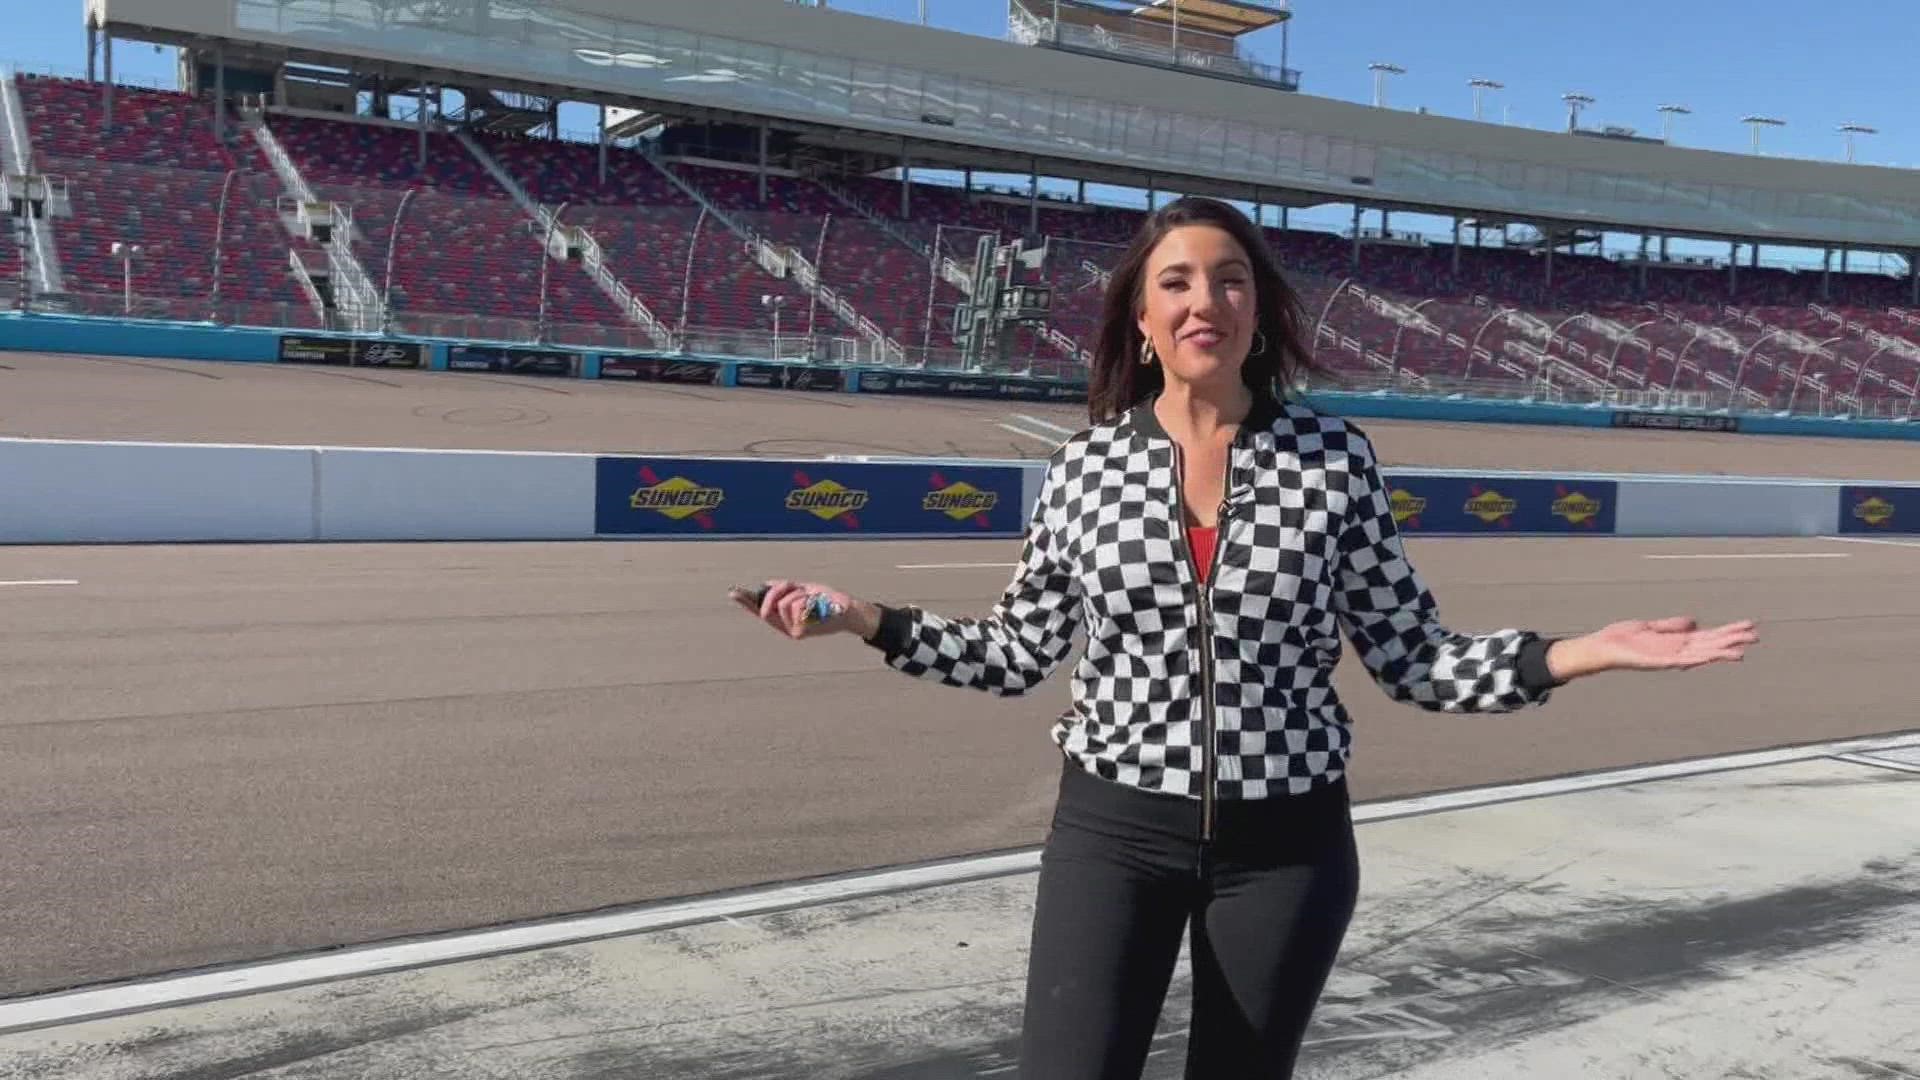 Team 12's Emily Pritchard shows us what it's like to do laps at Phoenix Raceway during a unique charity event.